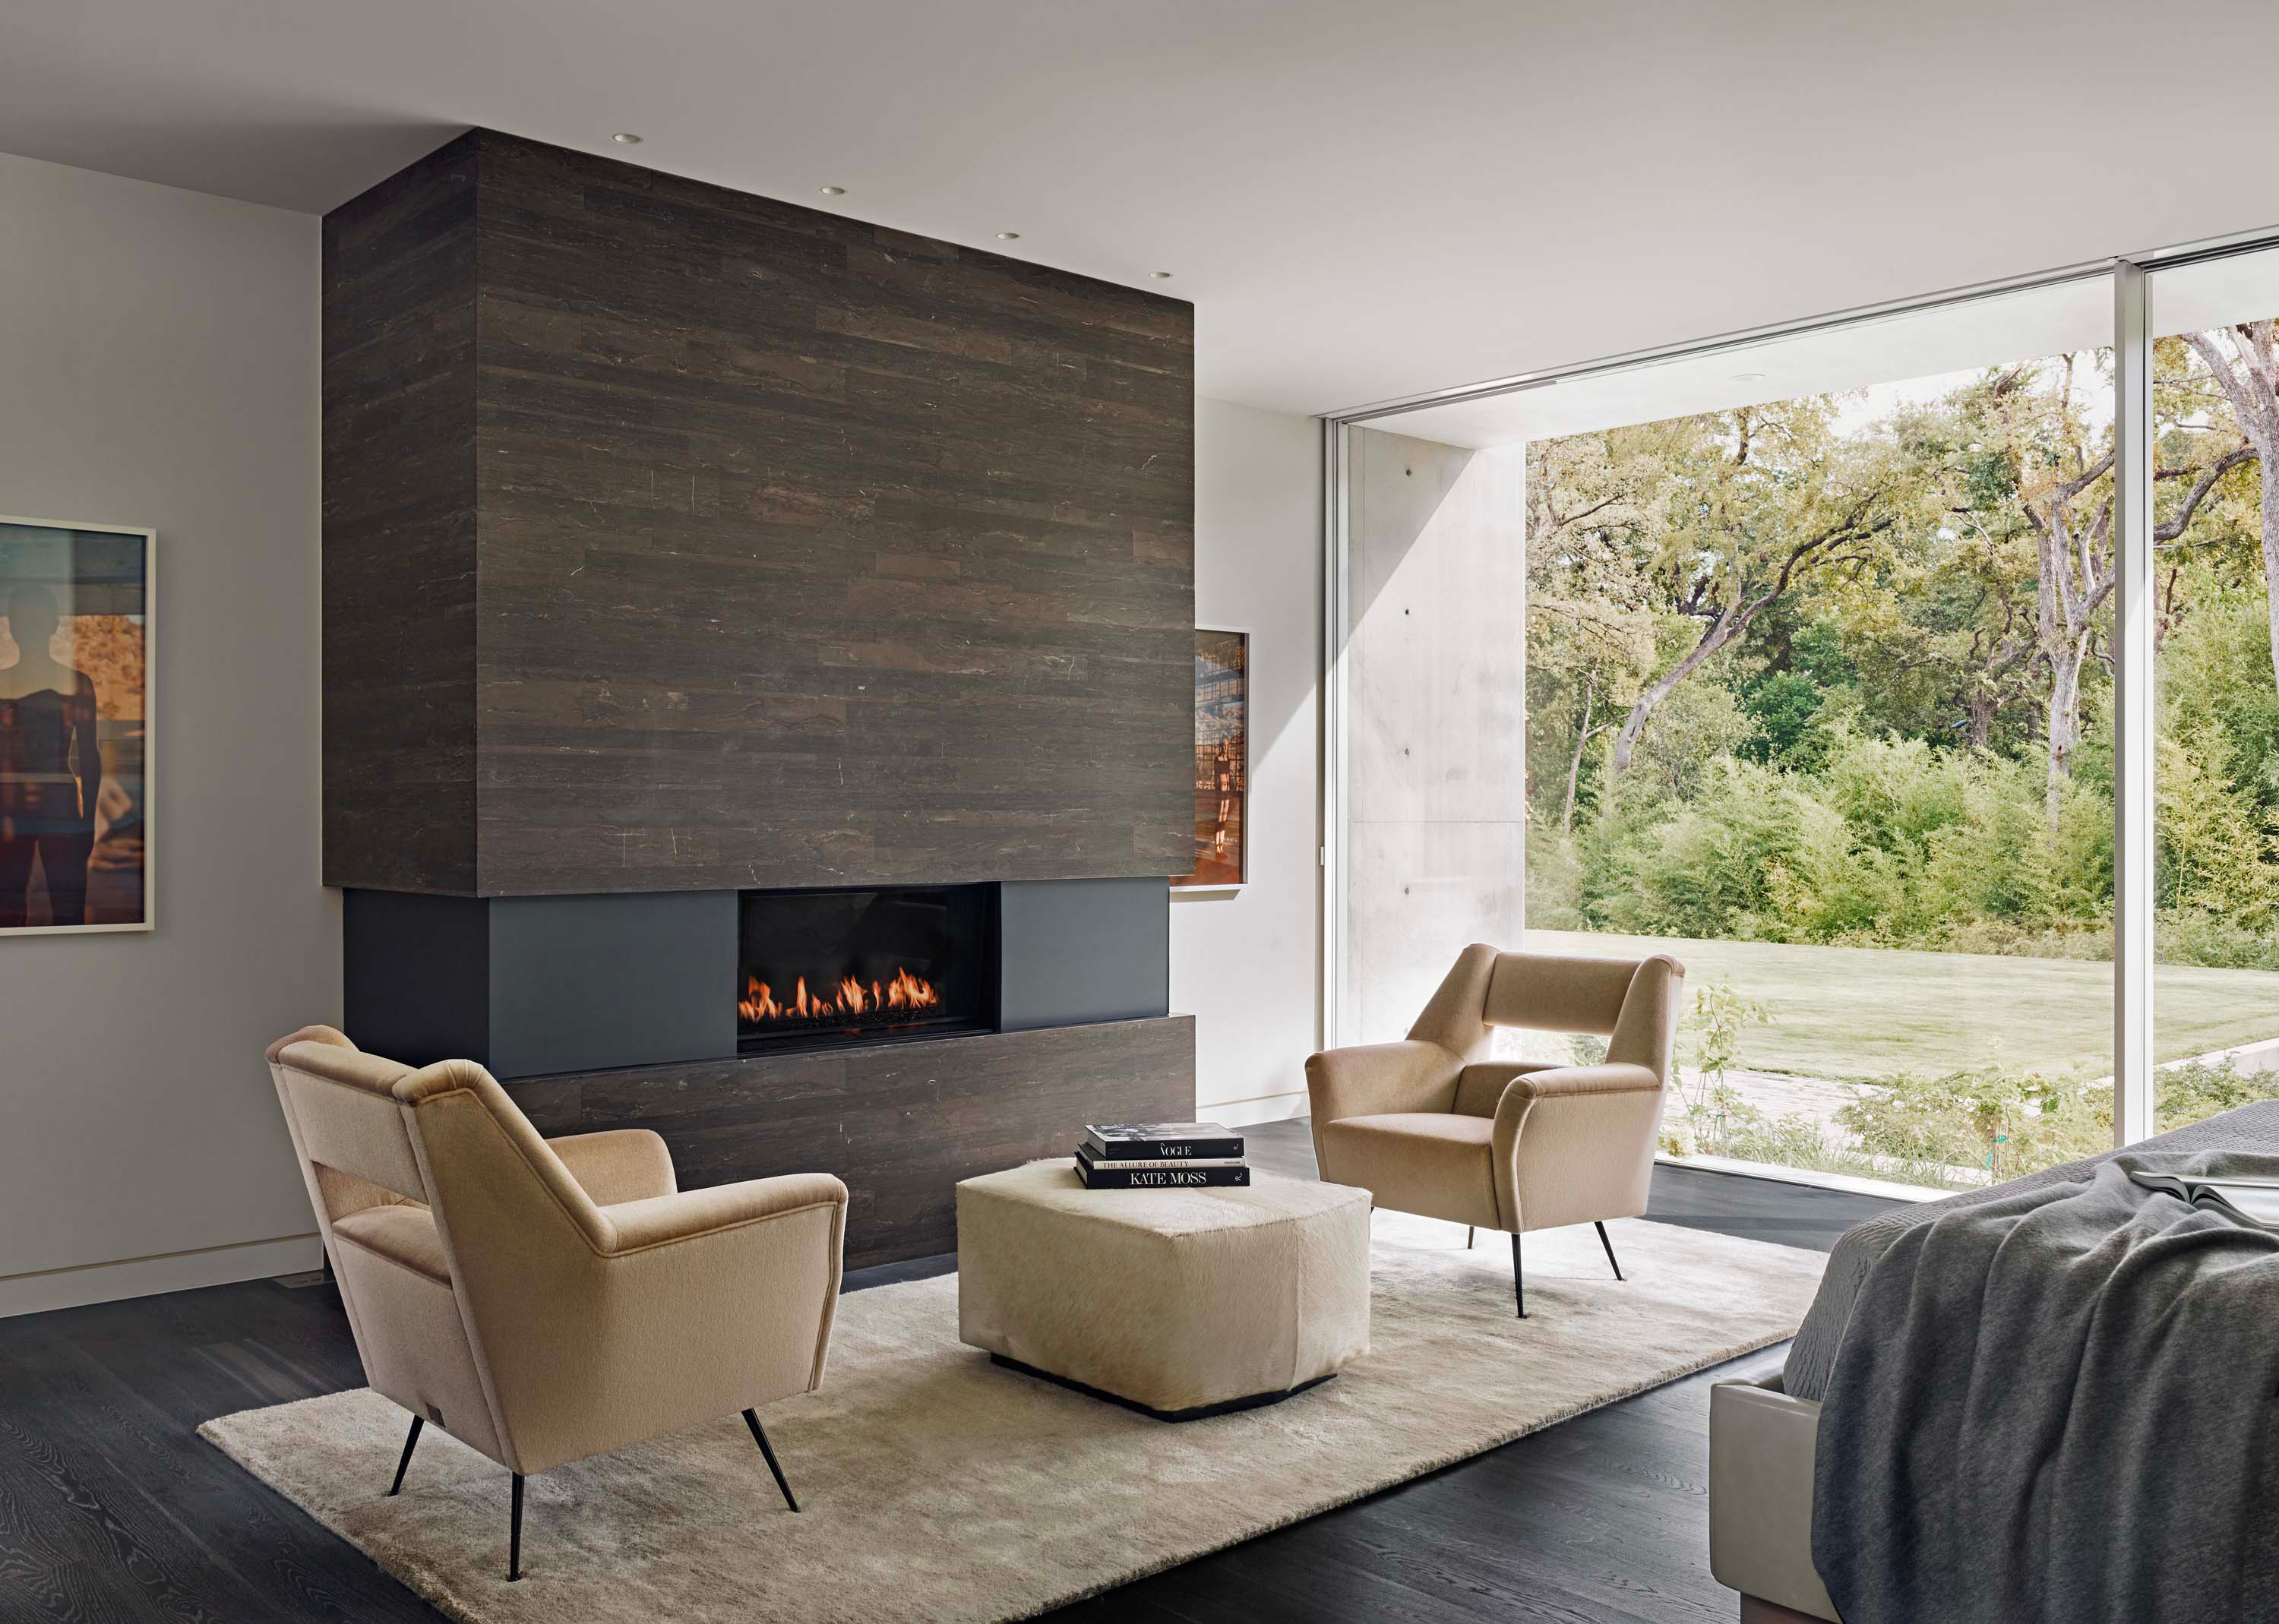 Interior photo of the Preston Hollow Residence by Specht Novak Architects. Shot by Manolo Langis, featuring cozy living area with a fireplace, and views of the backyard.